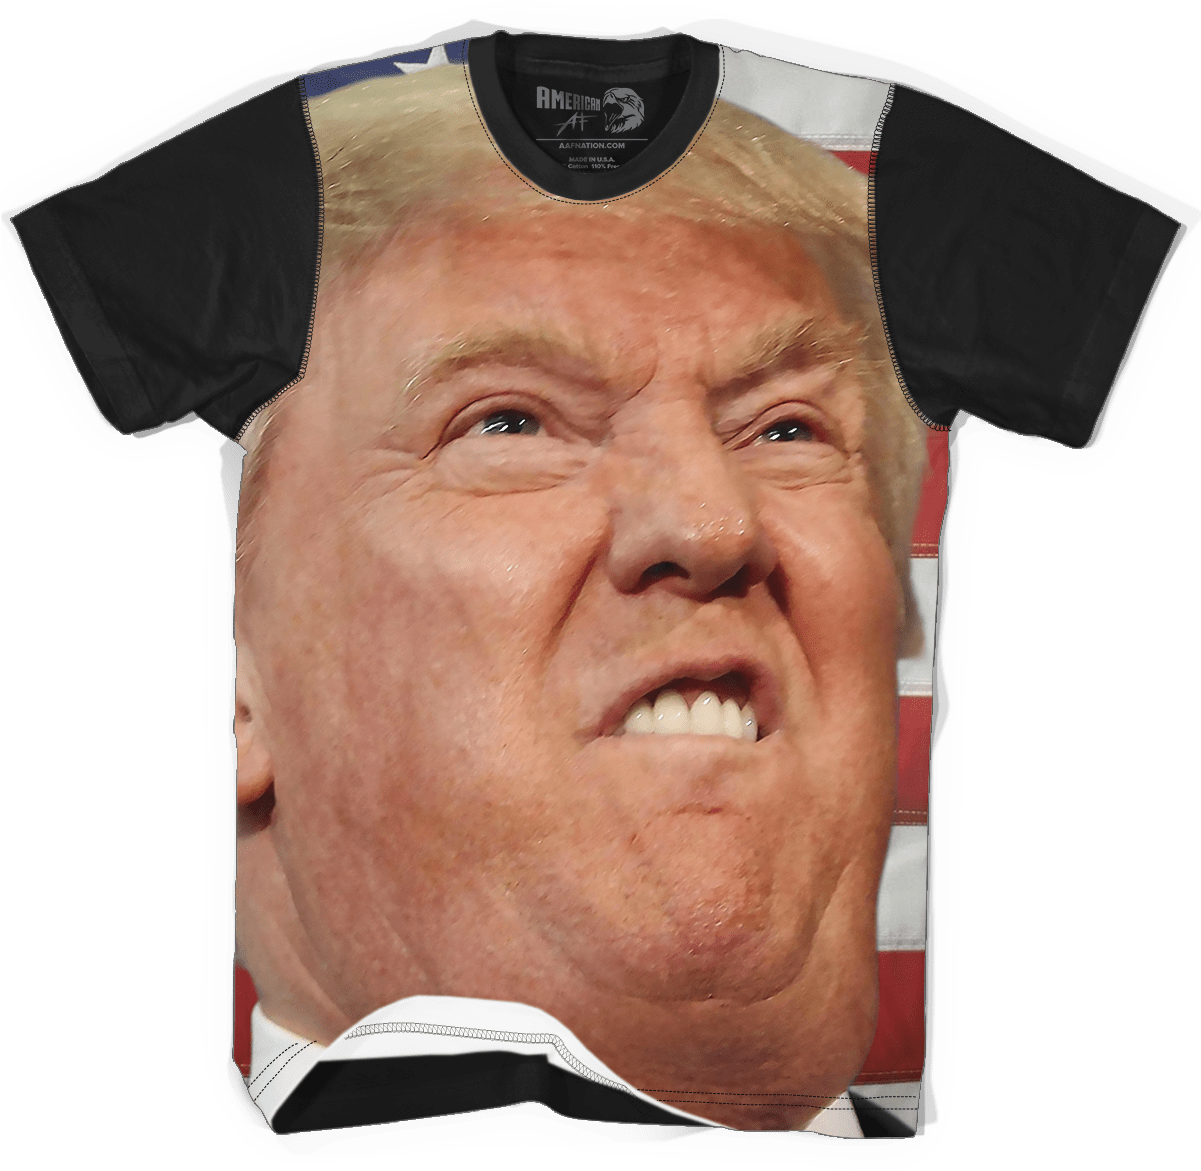 A Shirt With A Man's Face On It